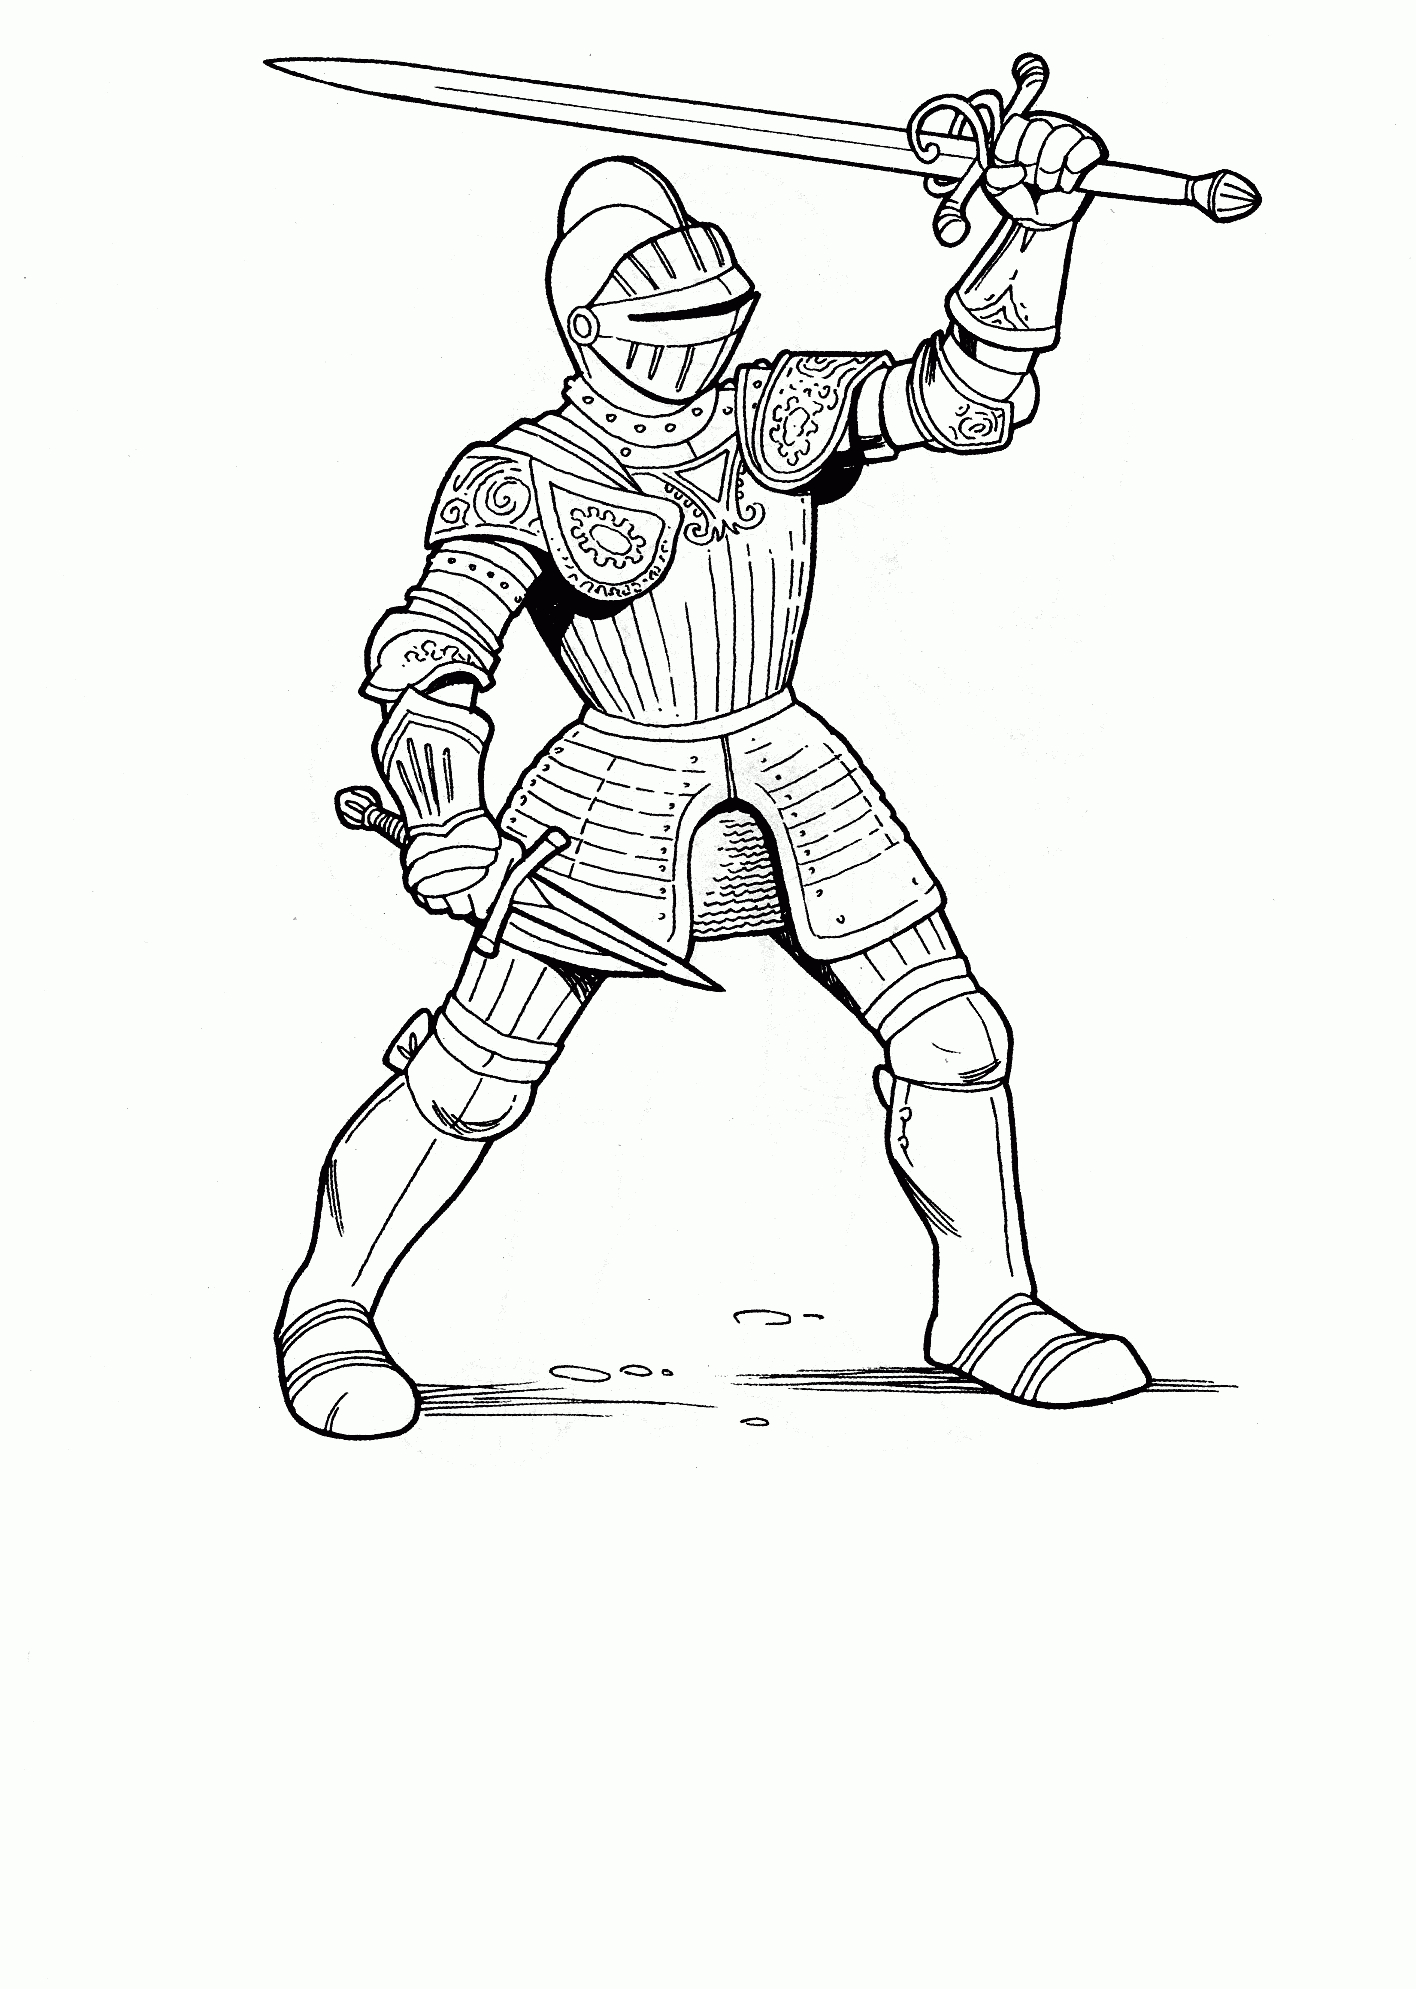 Knight Coloring Sheets 01 | Coloring | Coloring Pages, Color - Free ...